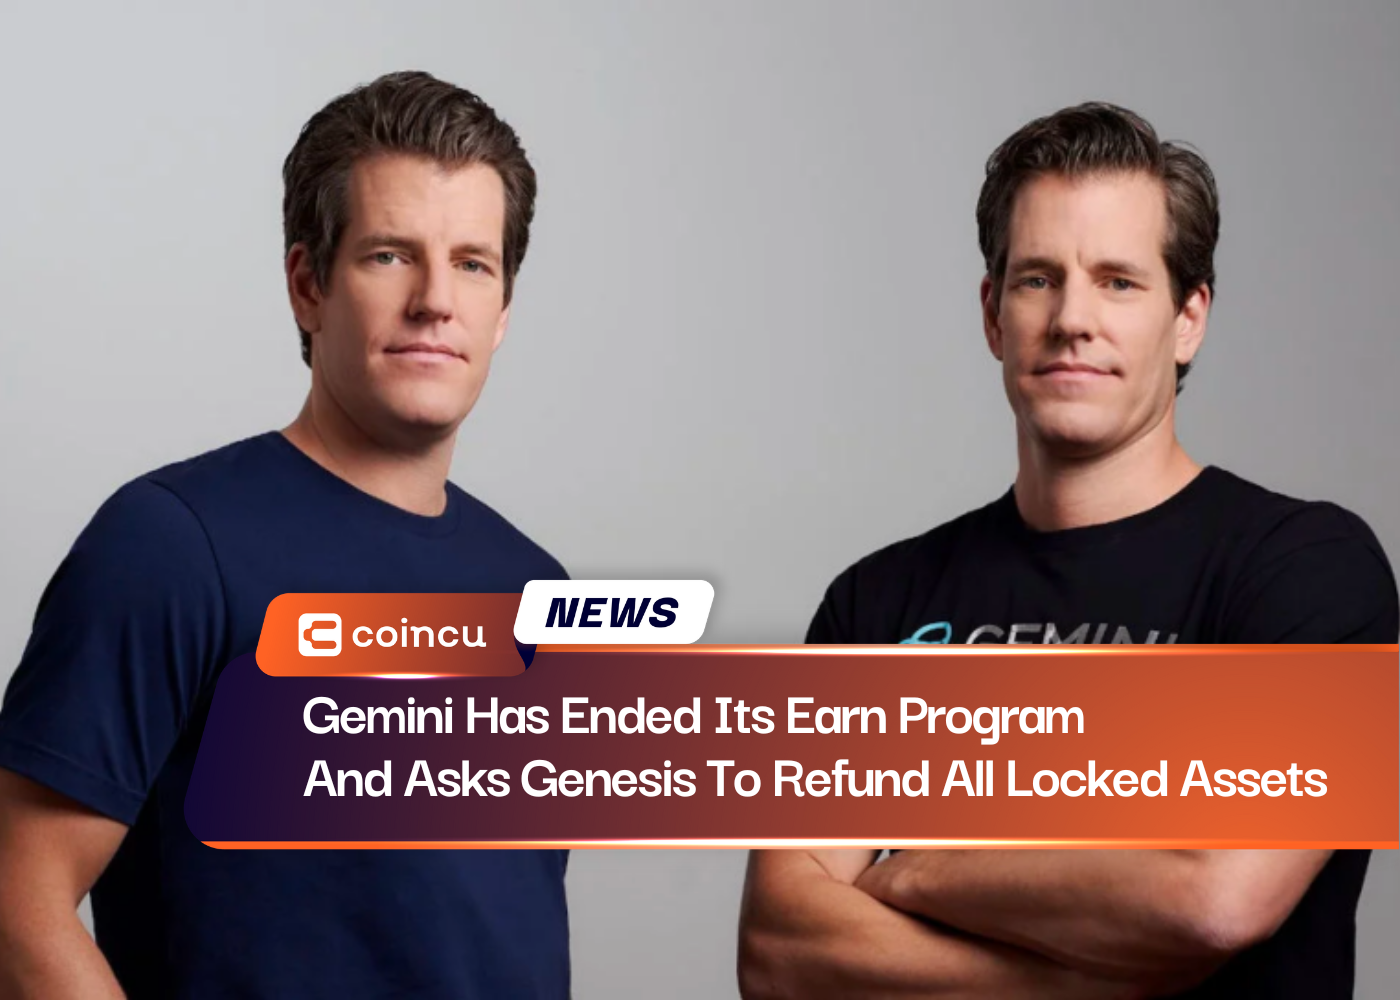 Gemini Has Ended Its Earn Program And Asks Genesis To Refund All Locked Assets